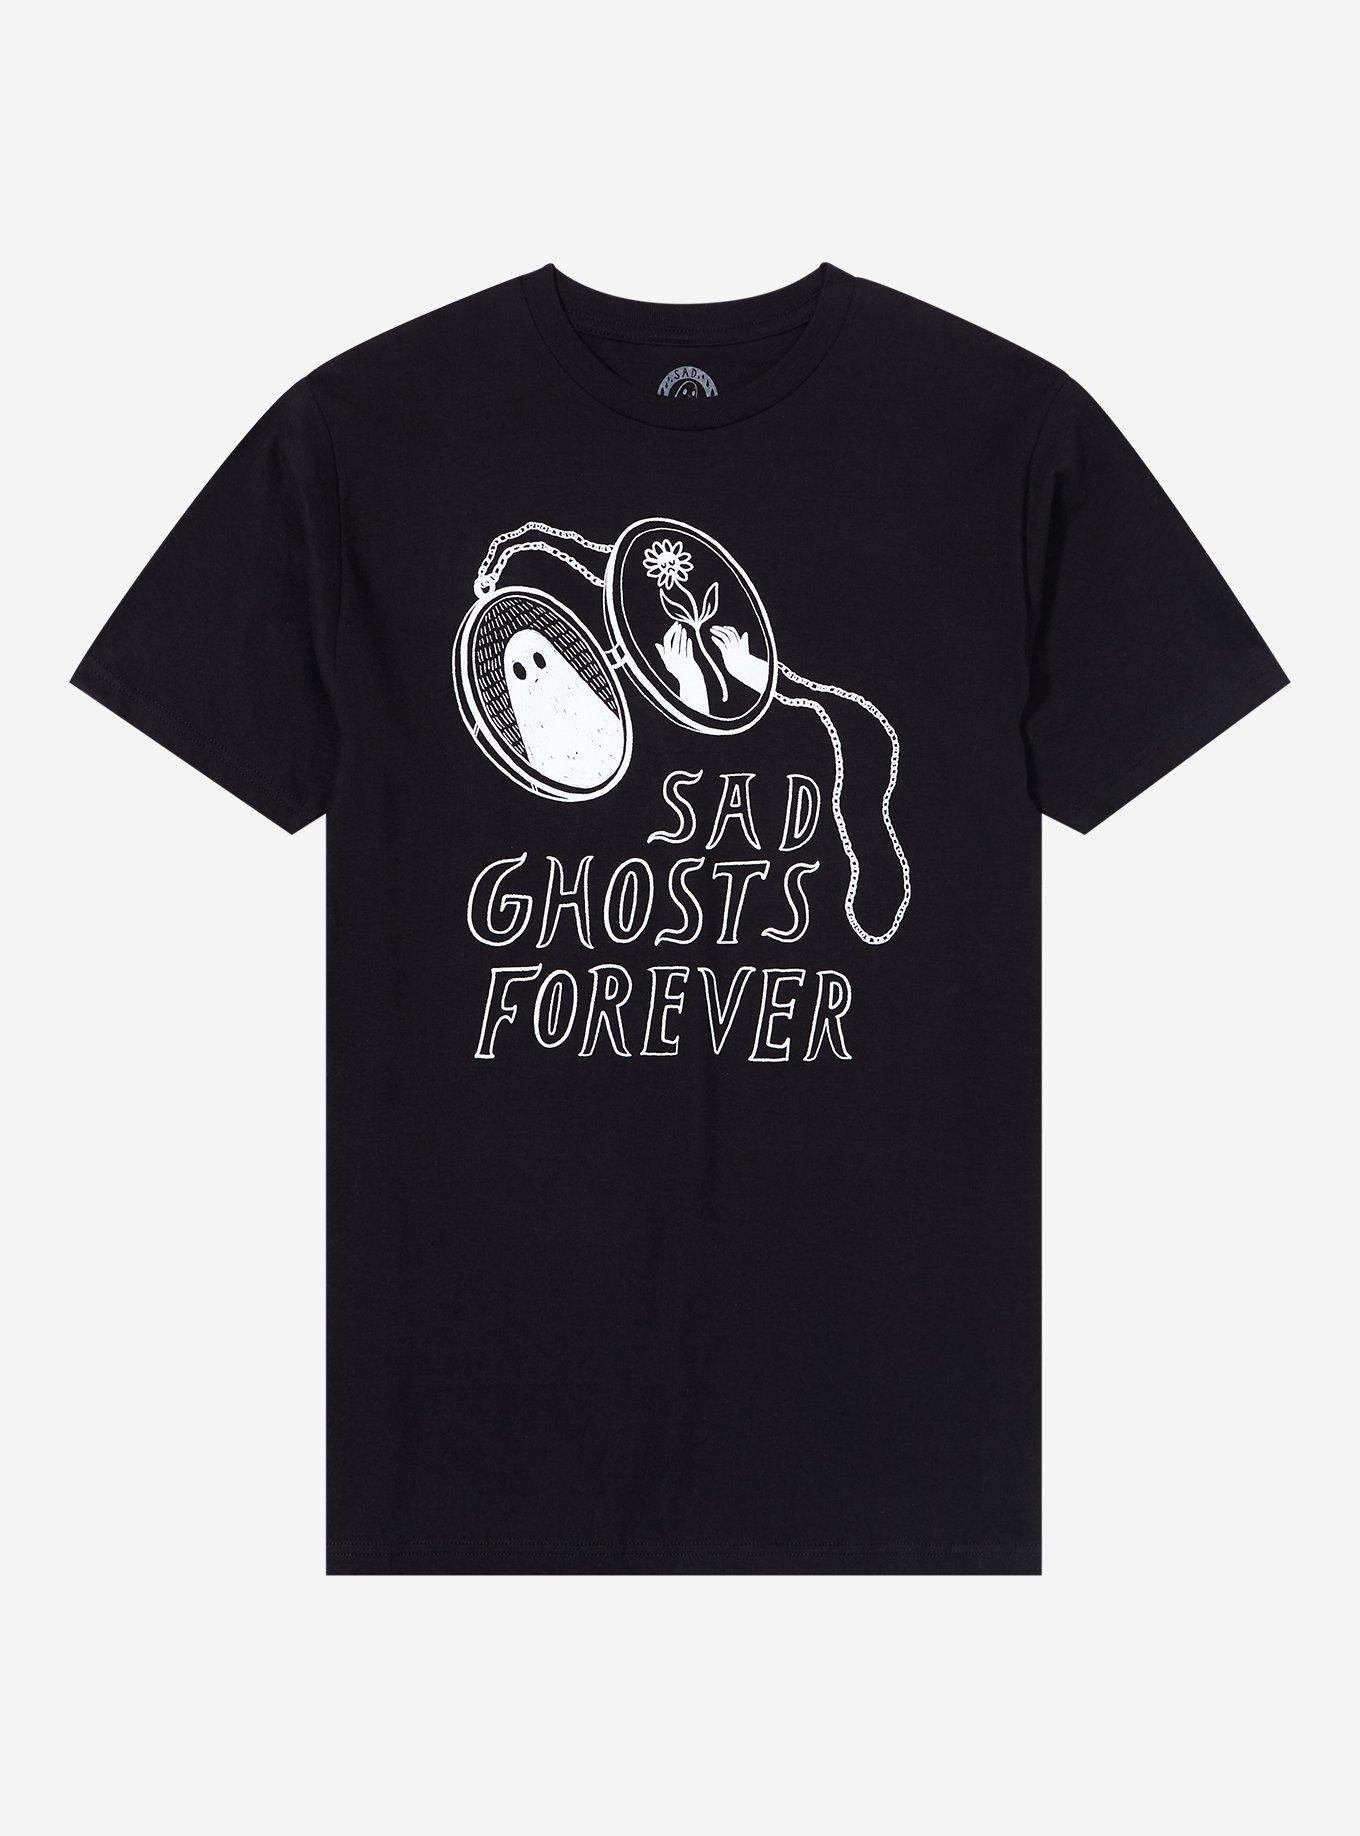 Sad Ghosts Forever T-Shirt By The Sad Ghost Club, BLACK, hi-res